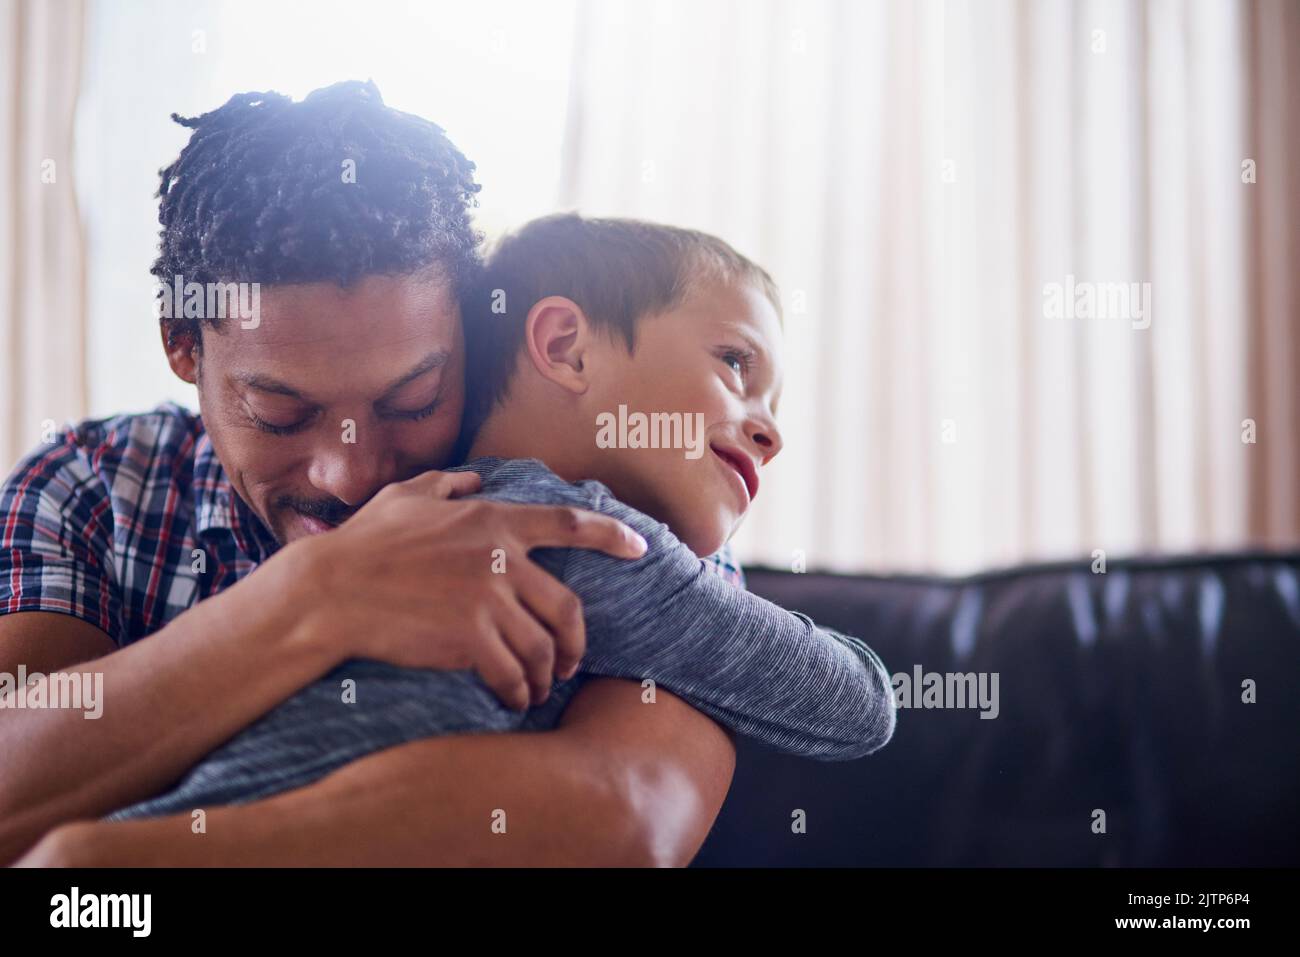 Filling each others lives with endless amounts of love. a father and son spending some quality time together at home. Stock Photo